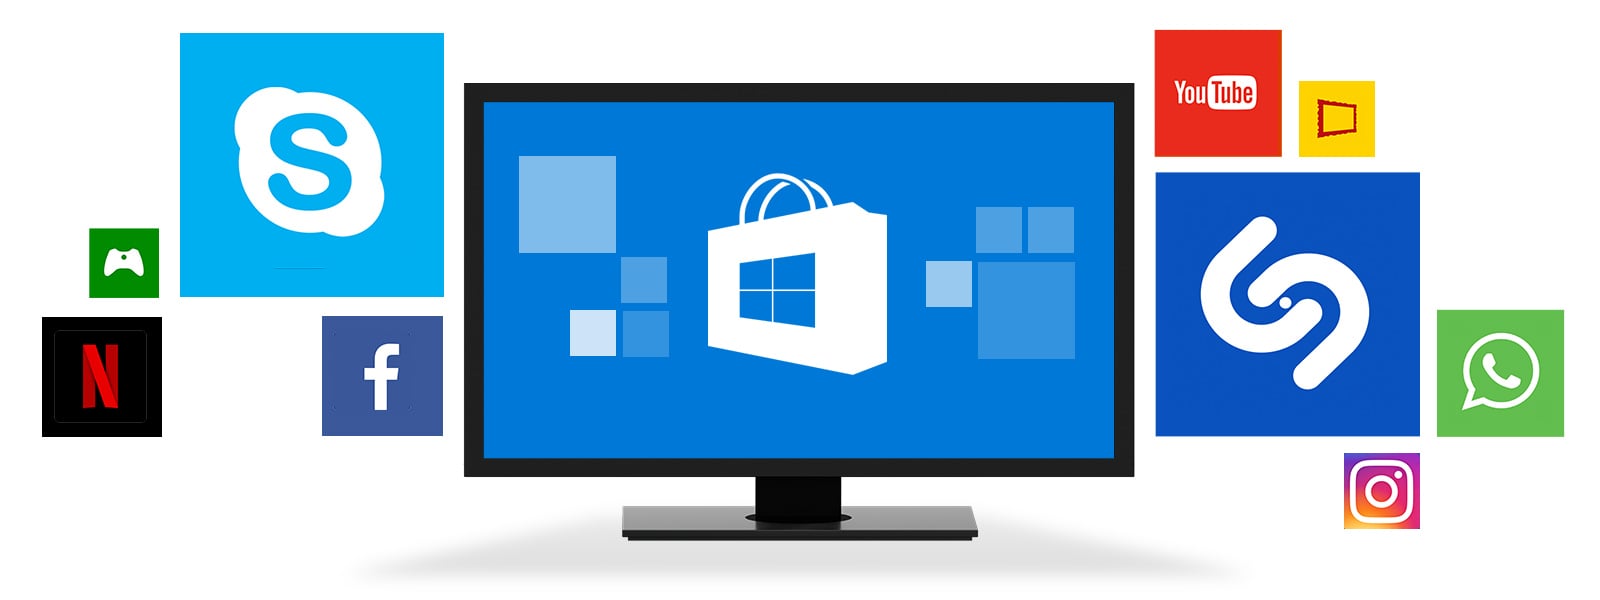 Microsoft is rolling out a new look for its online web-store